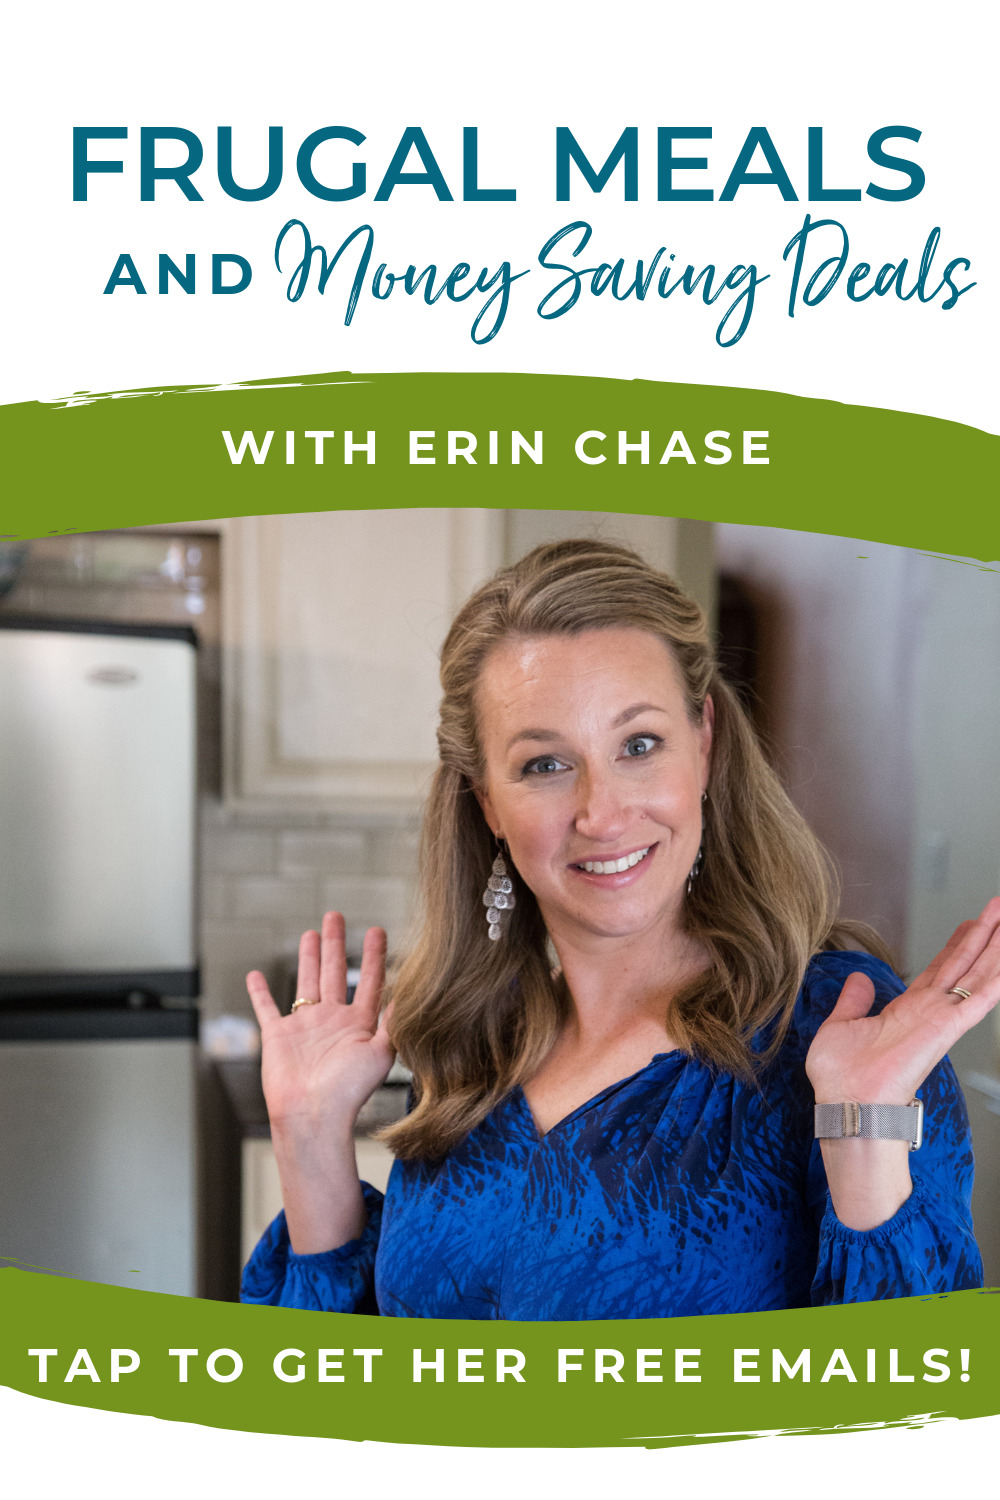 Sign up for Erin Chase's free email newsletter!